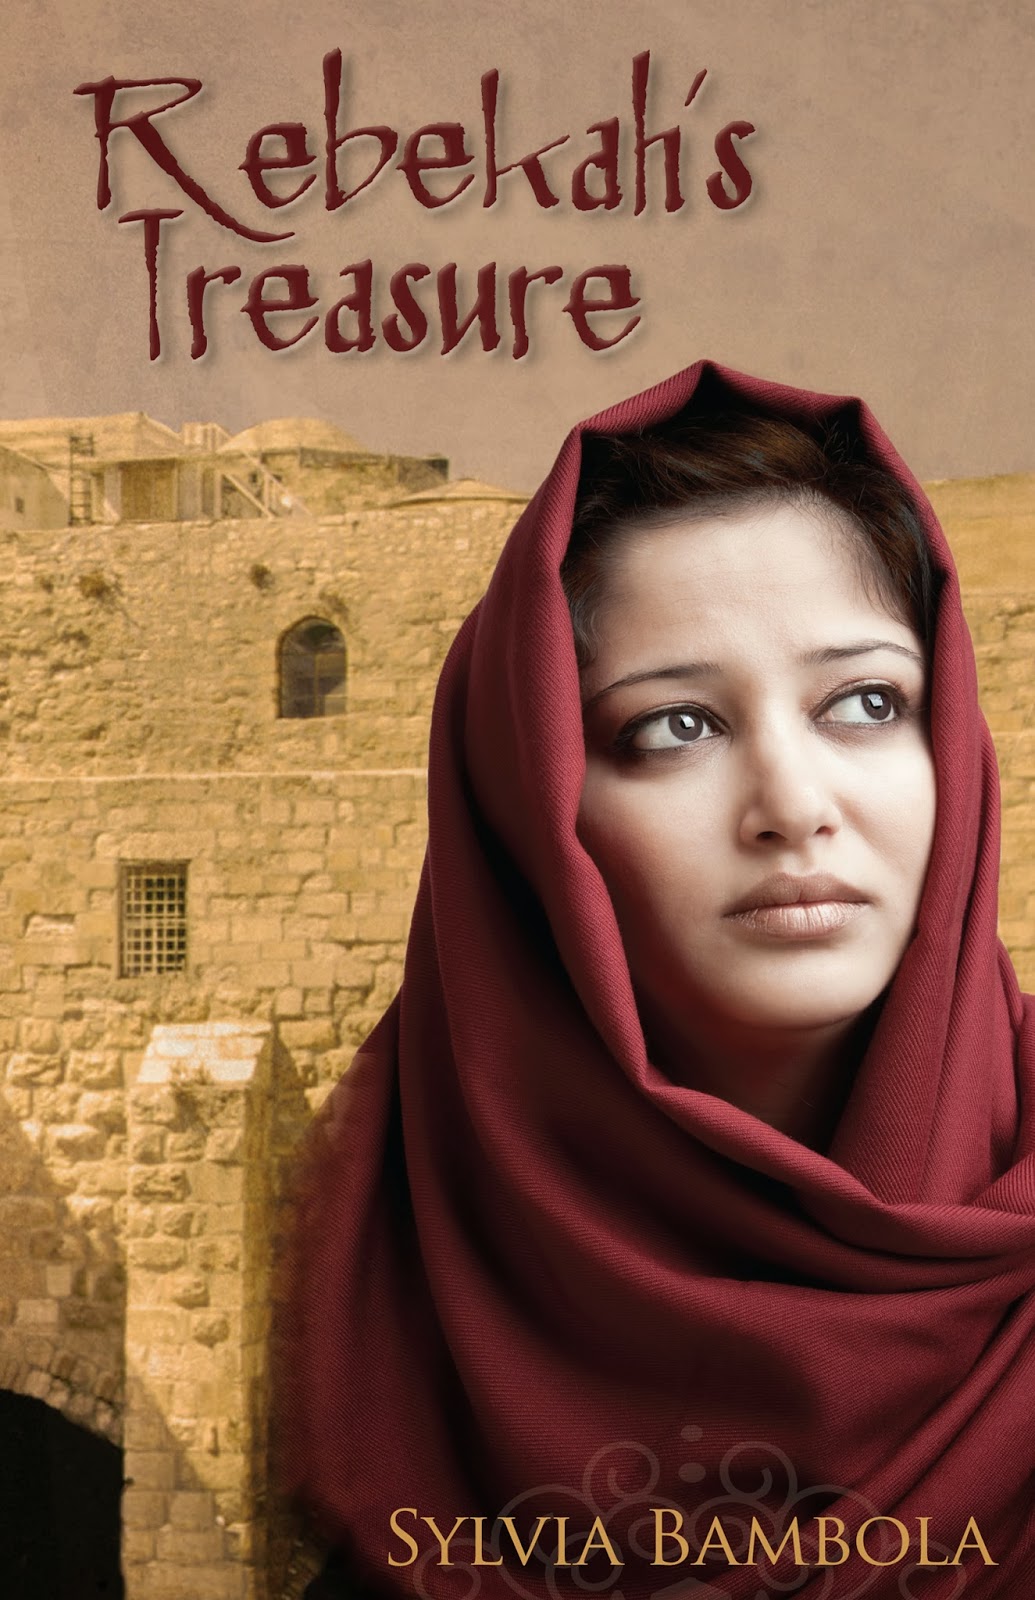 You are currently viewing COTT: Rebekah’s Treasure by Sylvia Bambola